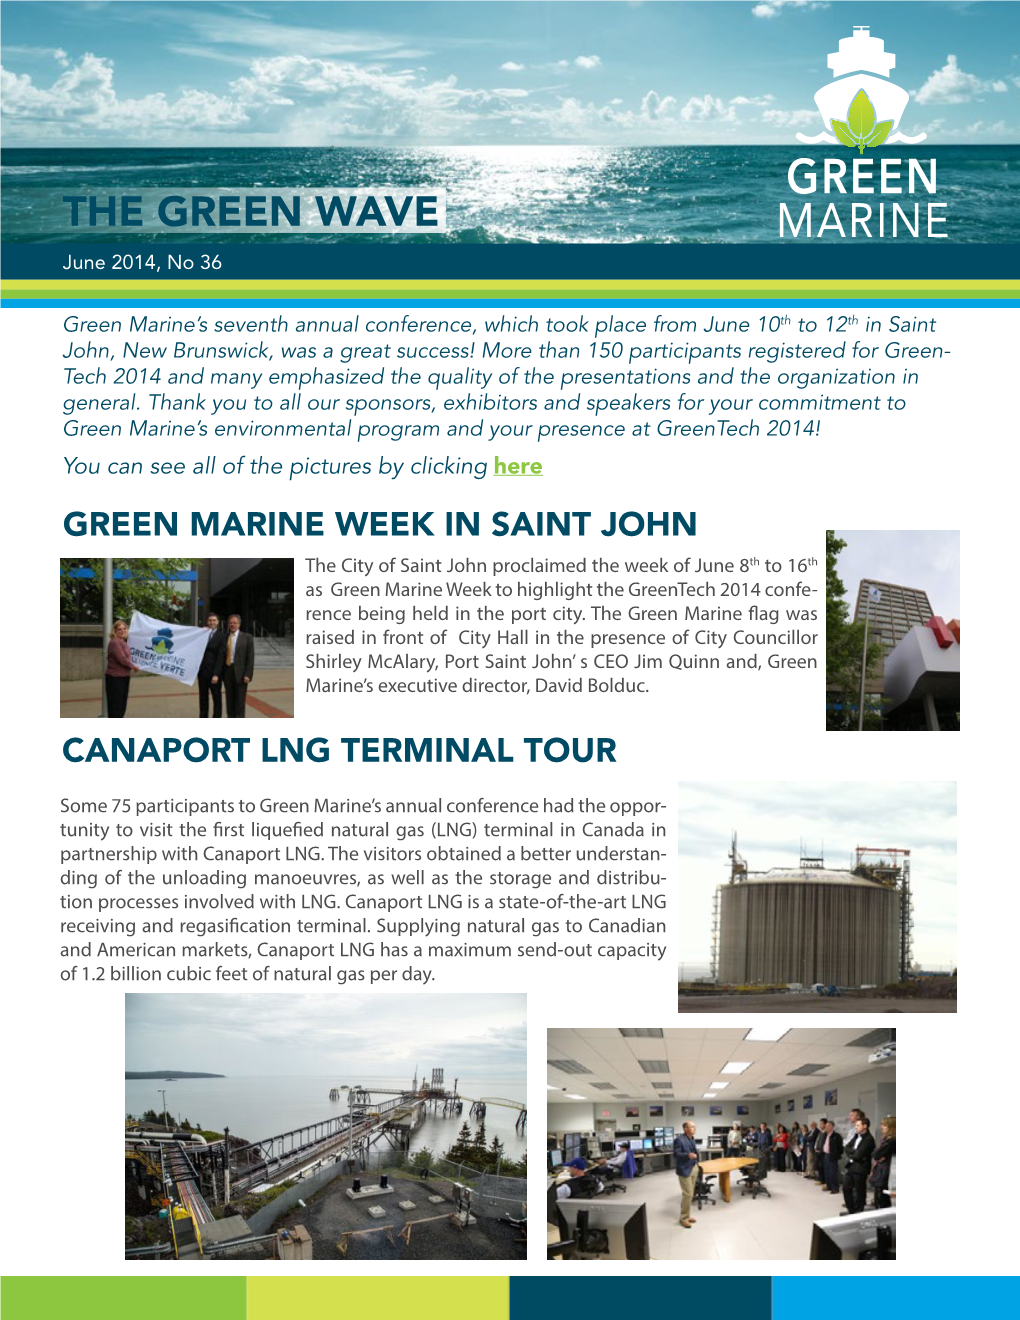 THE GREEN WAVE June 2014, No 36